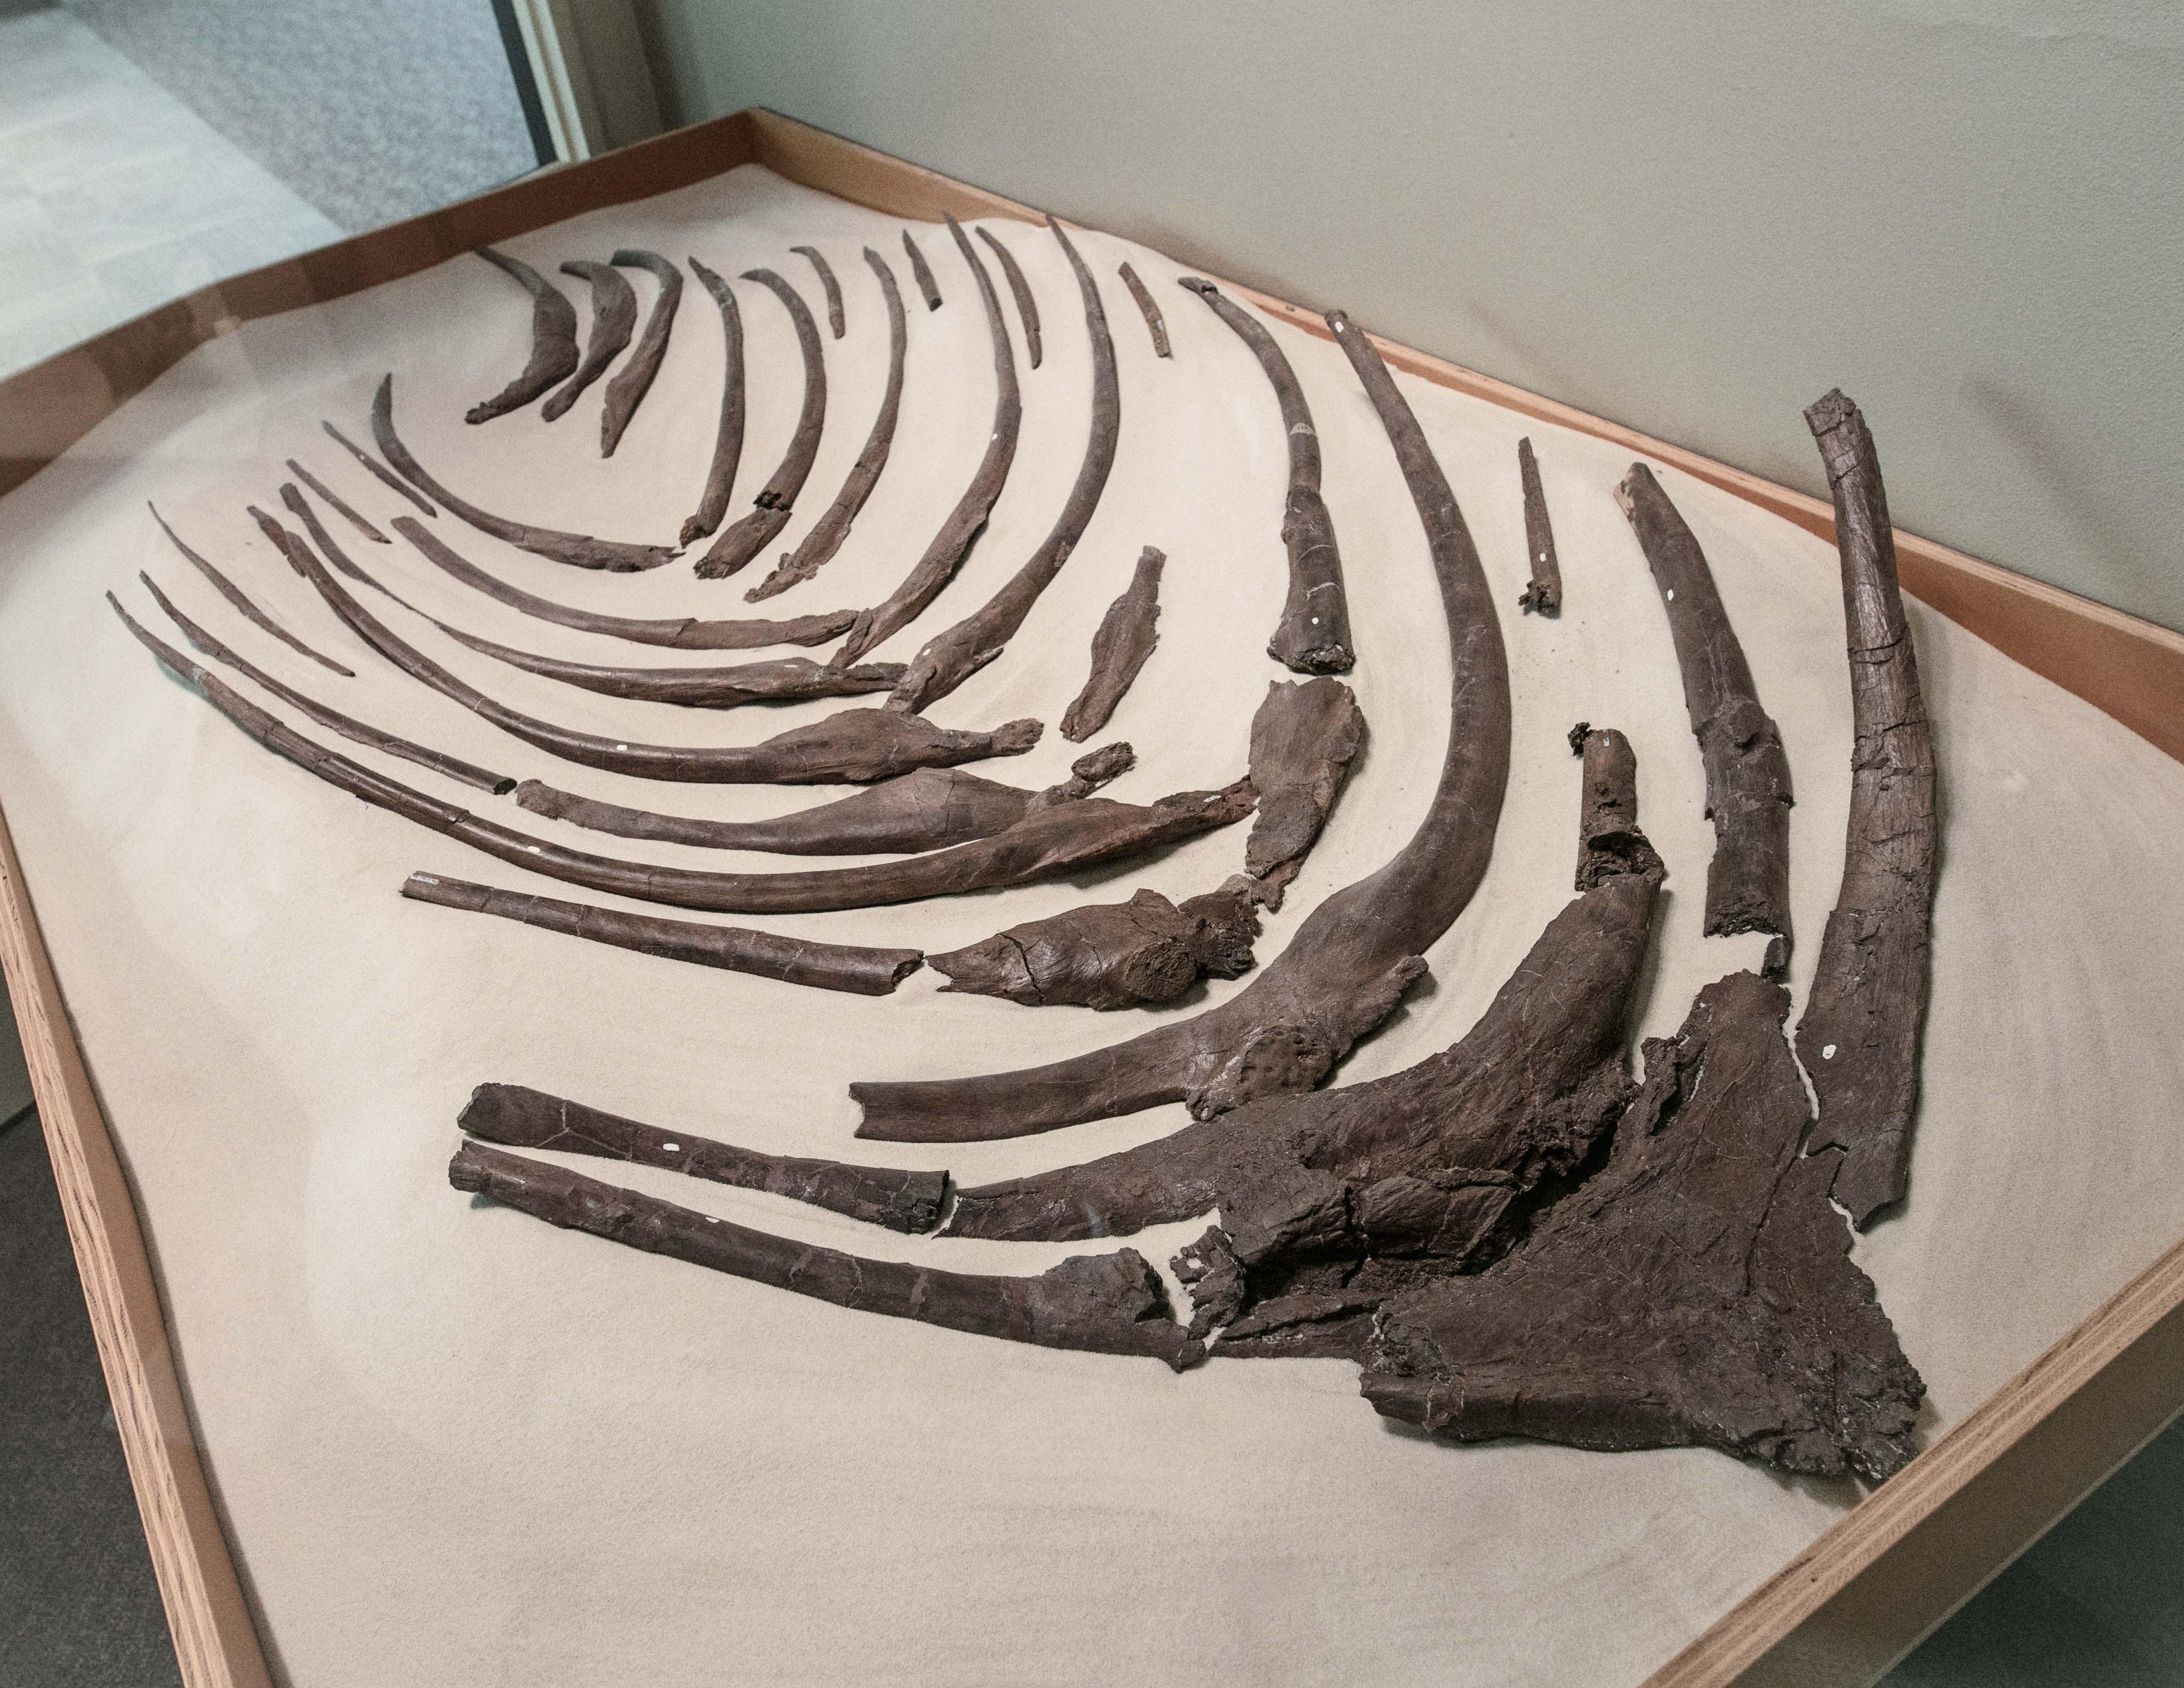 Sue’s fossilized gastralia, on display in the museum's Evolving Planet exhibit. (Zachary James Johnston / The Field Museum)